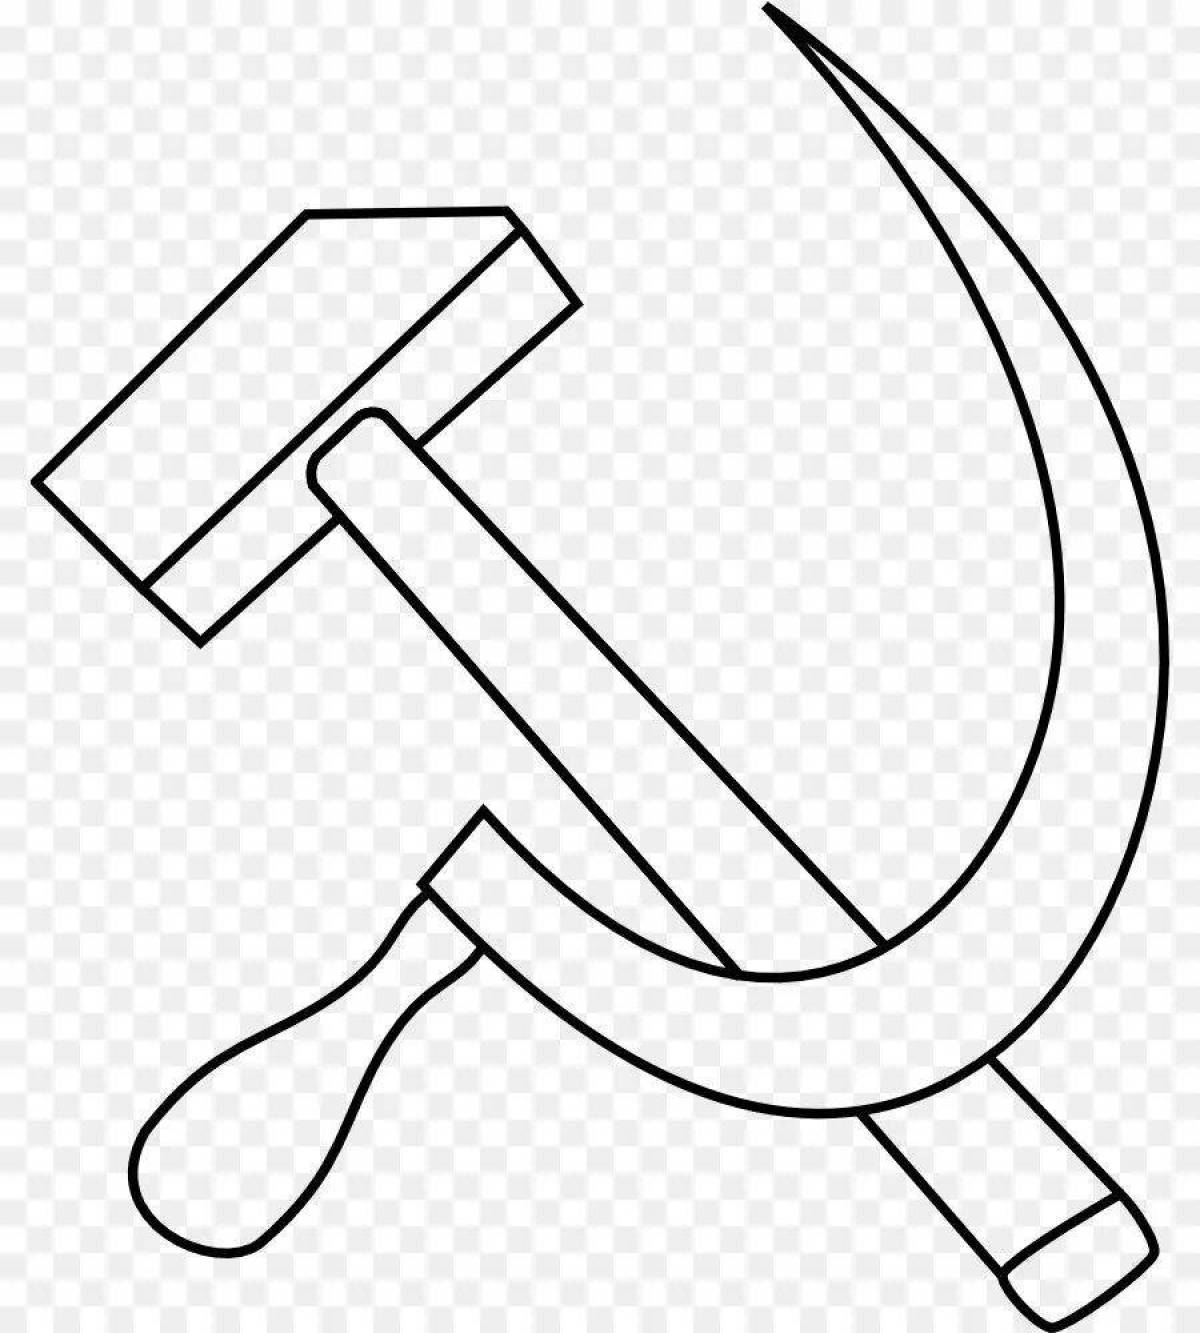 Playful hammer and sickle coloring page